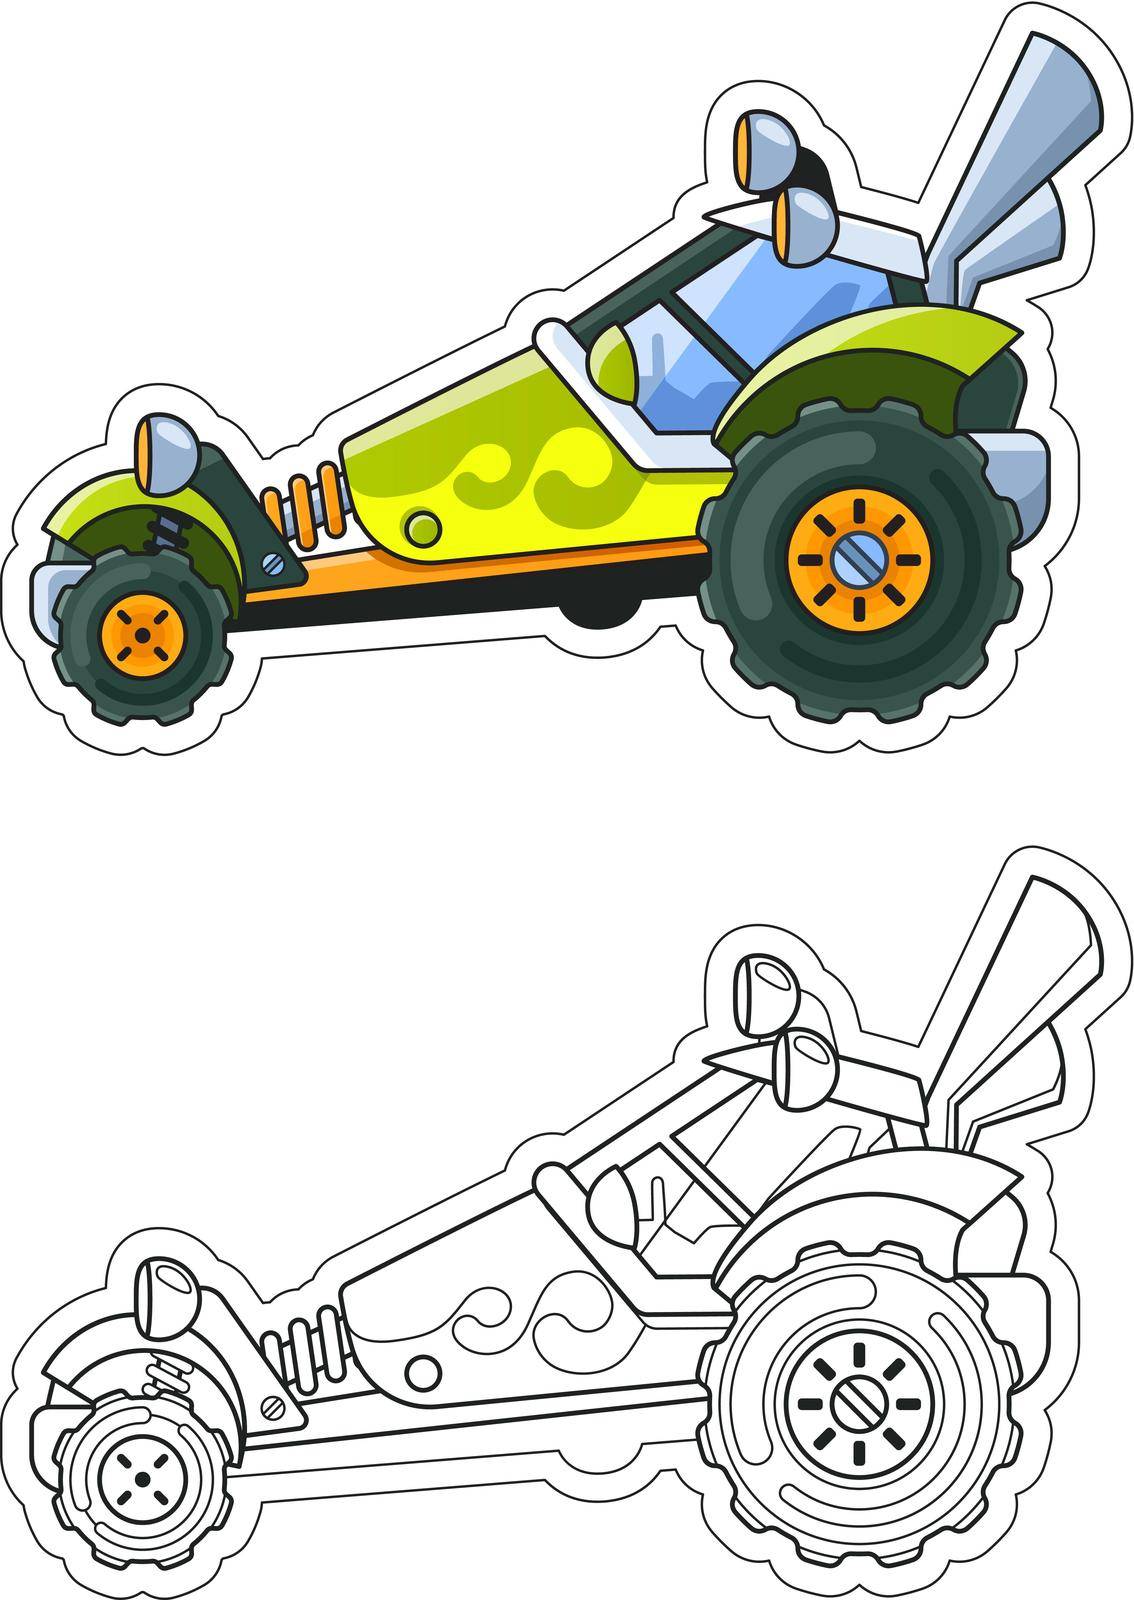 Green Buggy Side View Coloring Book. Colored Version and Line Art. Vector EPS10